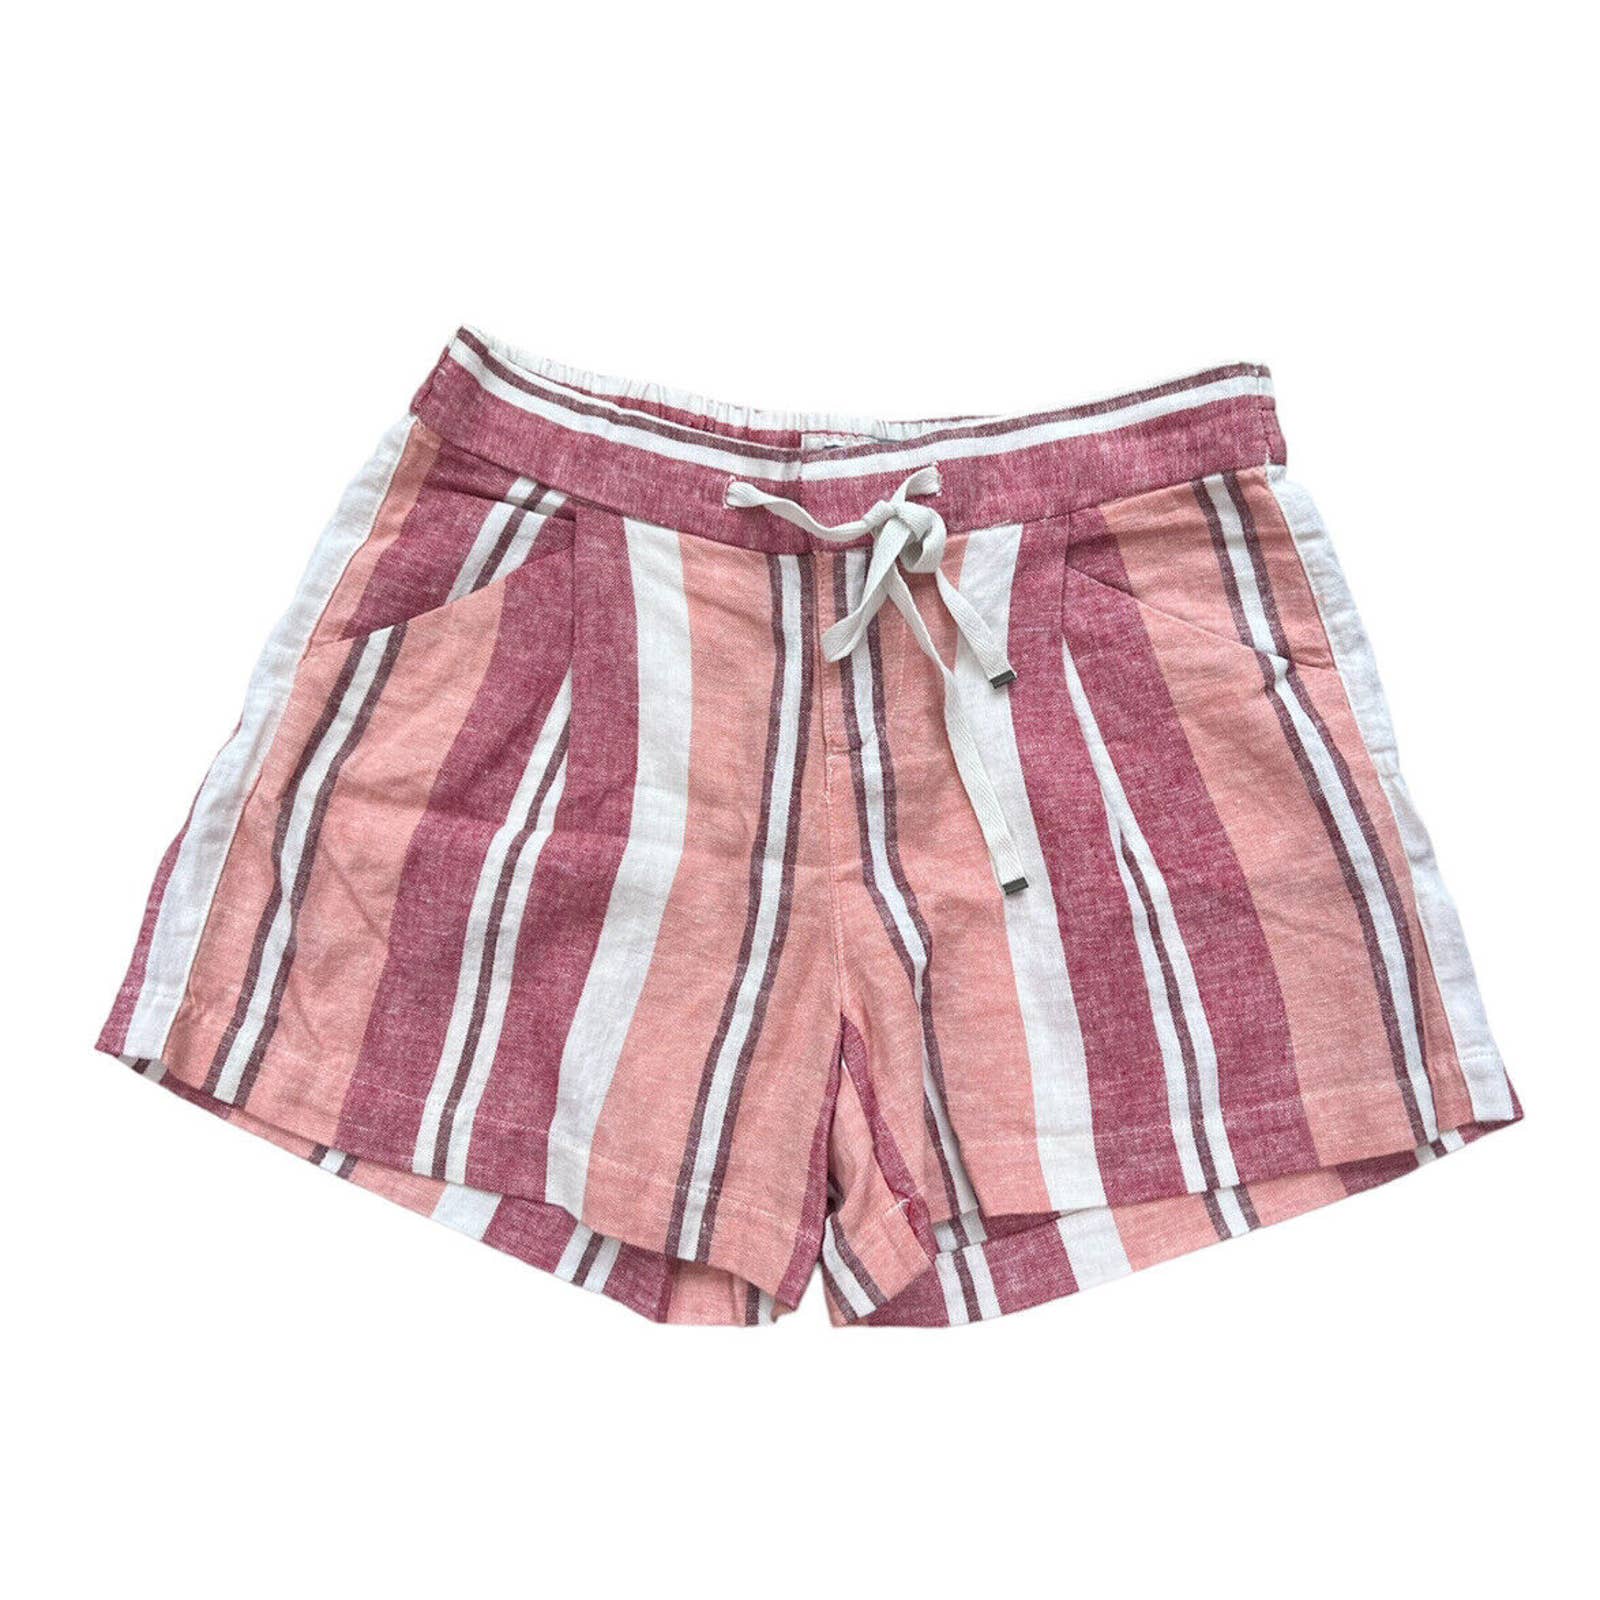 Old Navy Linen Blend Shorts Womens Size 2 High Waisted Striped Red White Casual